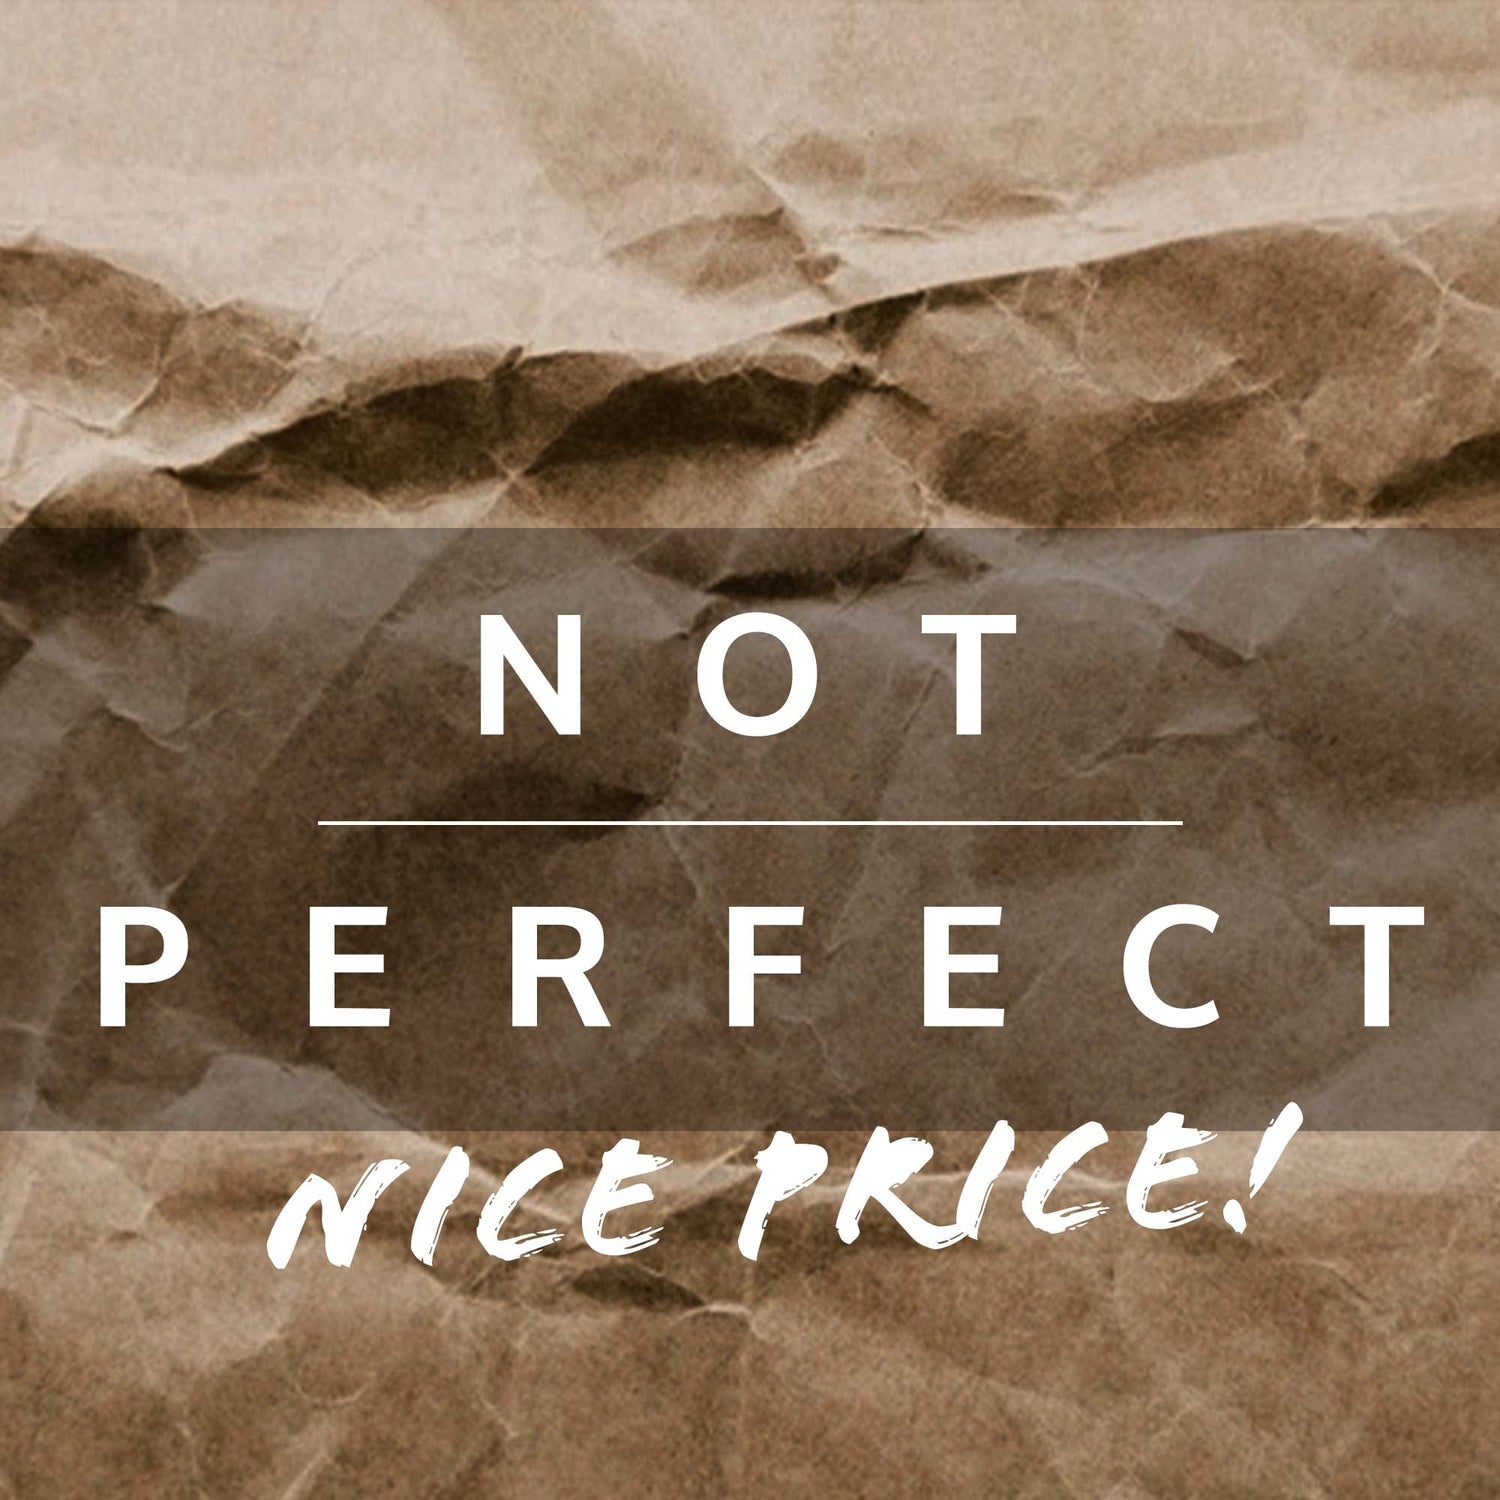 Not perfect products